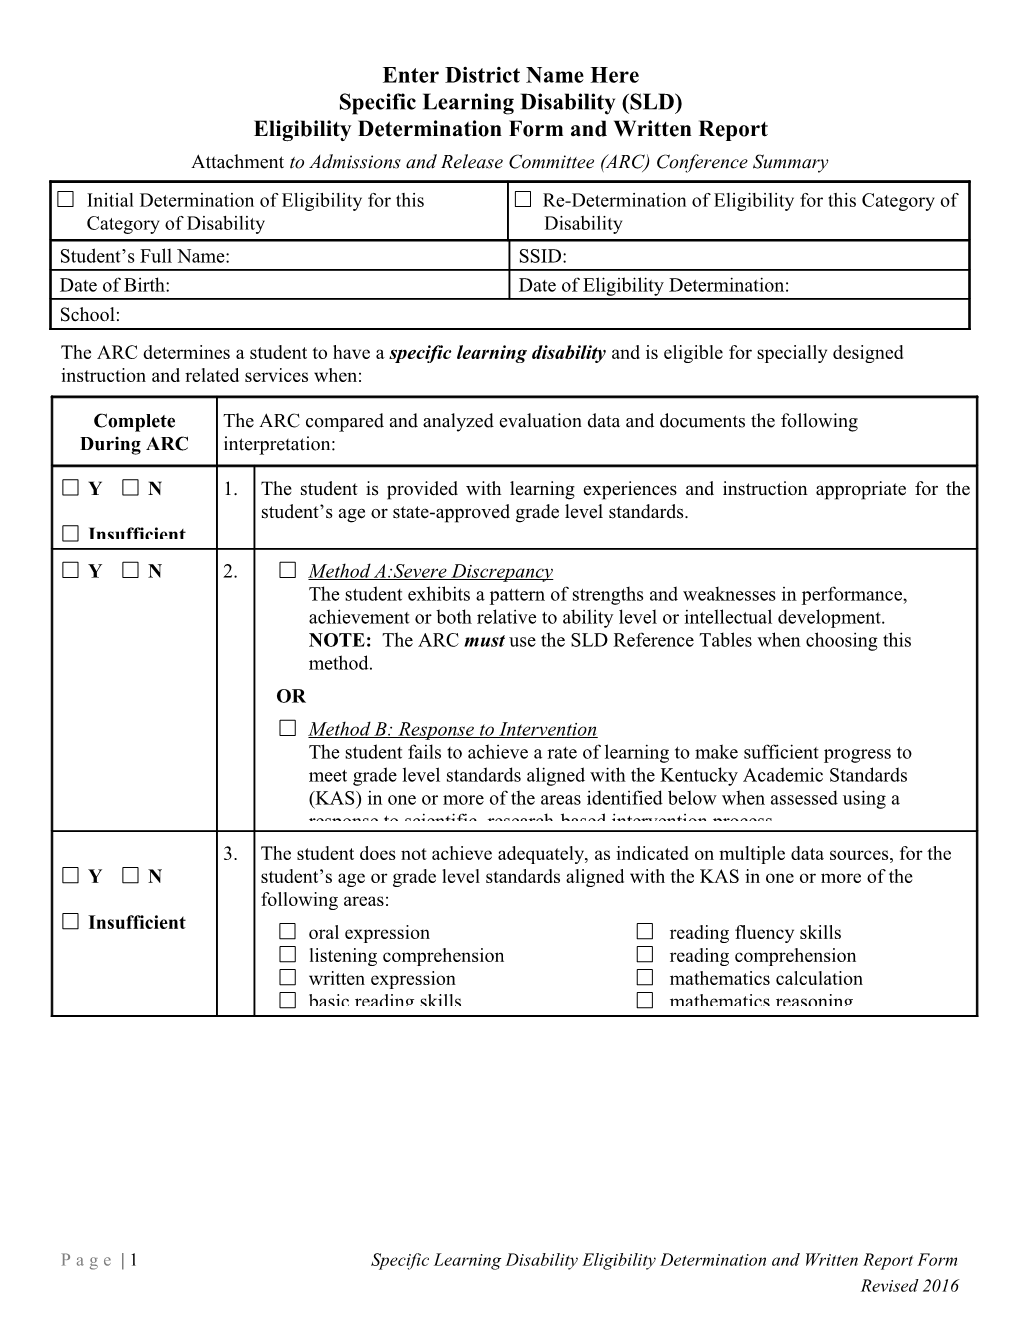 Specific Learning Disability Eligibility Determinination Form